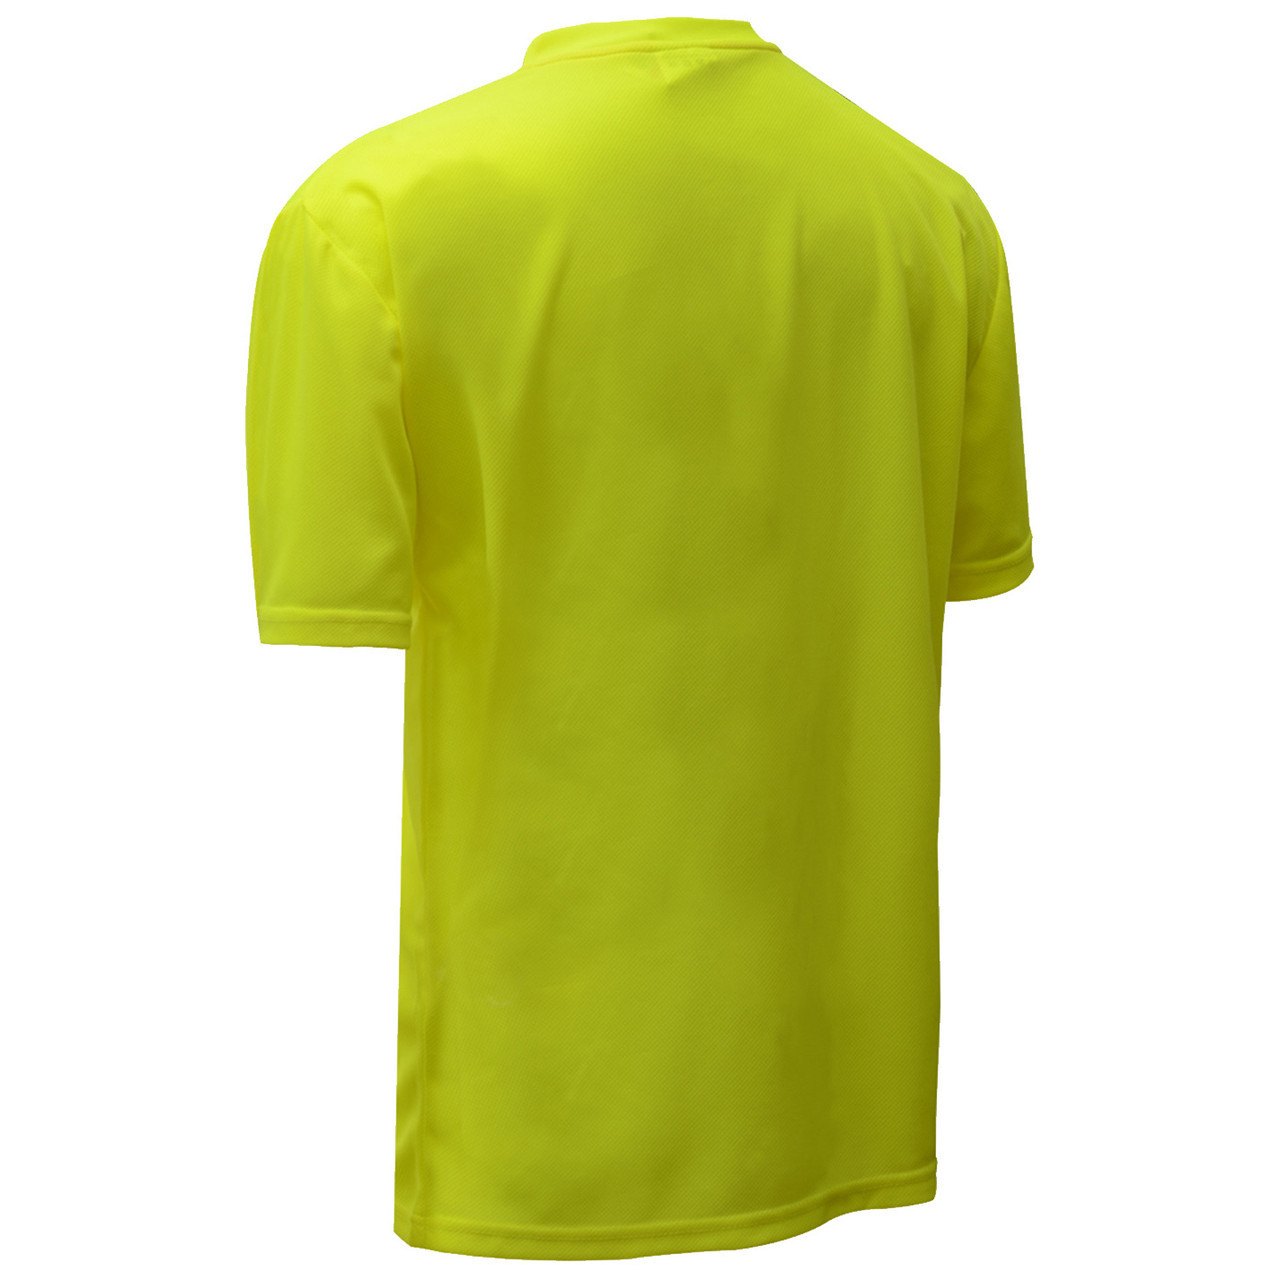 GSS Safety 5501 (MEN'S TALL)Moisture Wicking Safety Shirt - Yellow/Lime